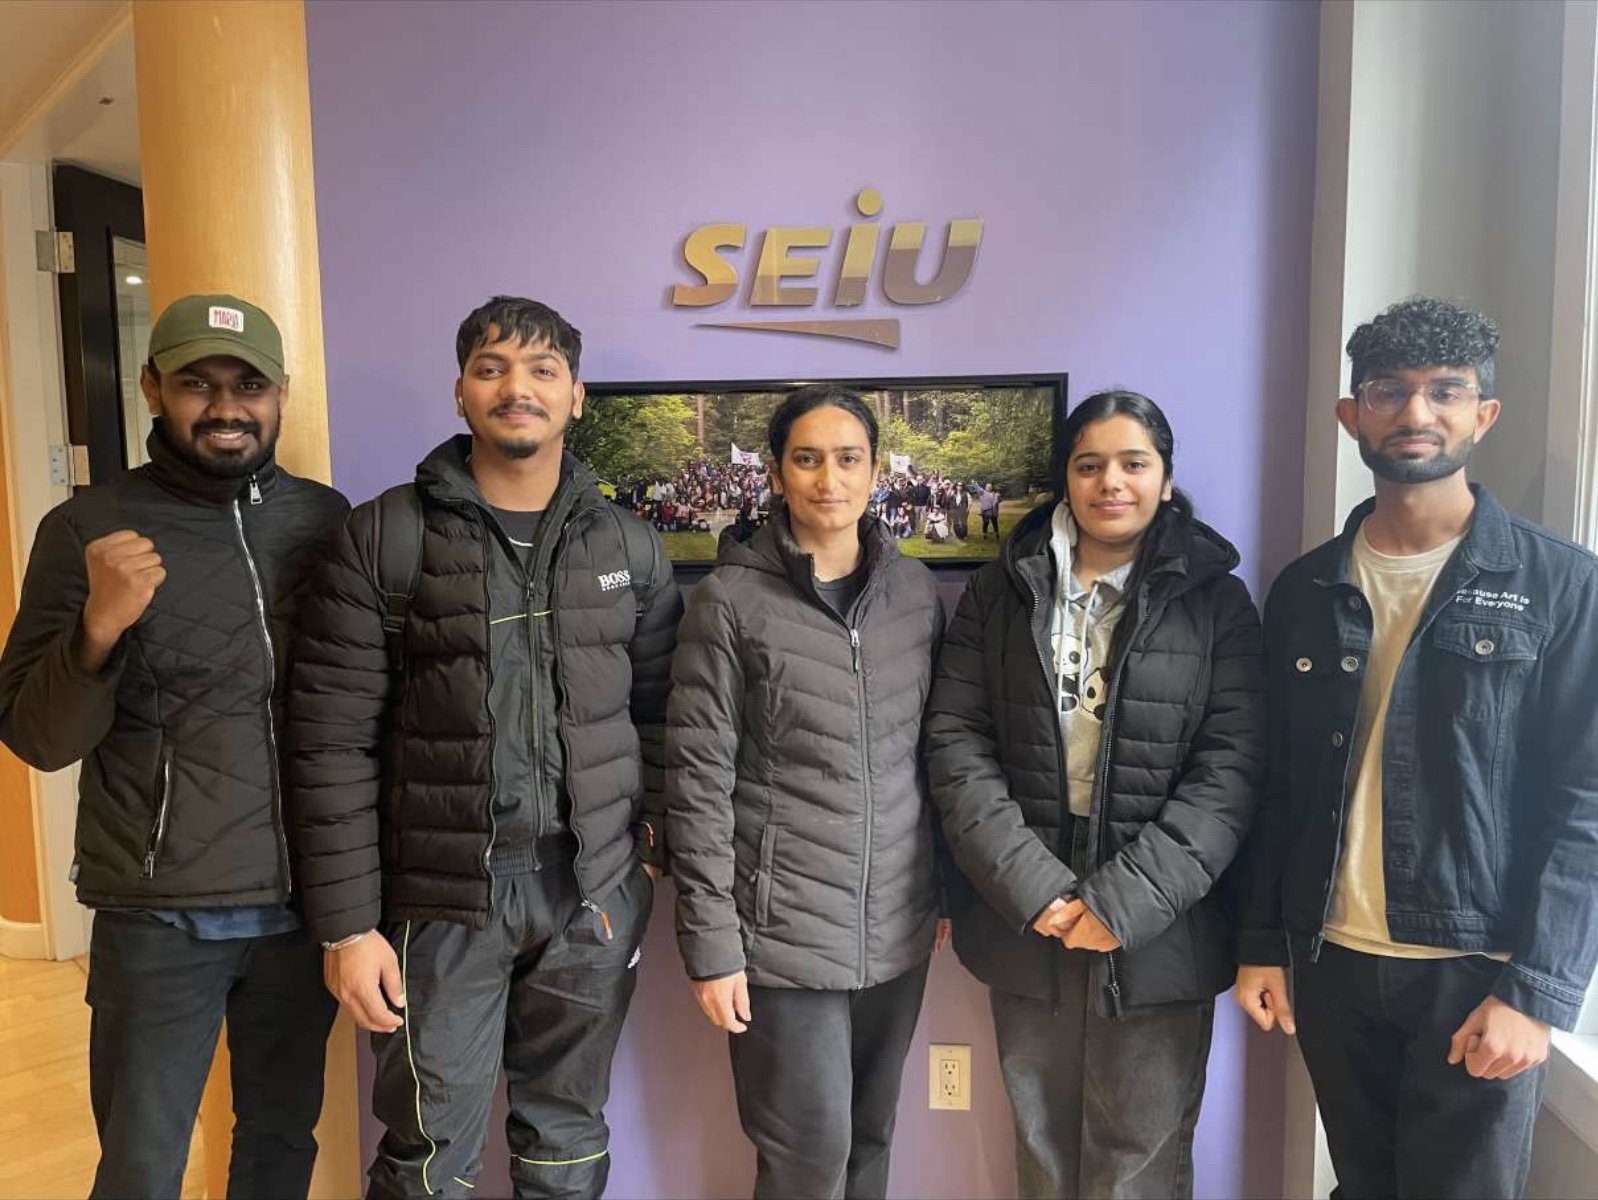 Five people in dark winter jackets stand in front of a purple wall. The wall is mounted with a metallic sign that says “SEIU.”